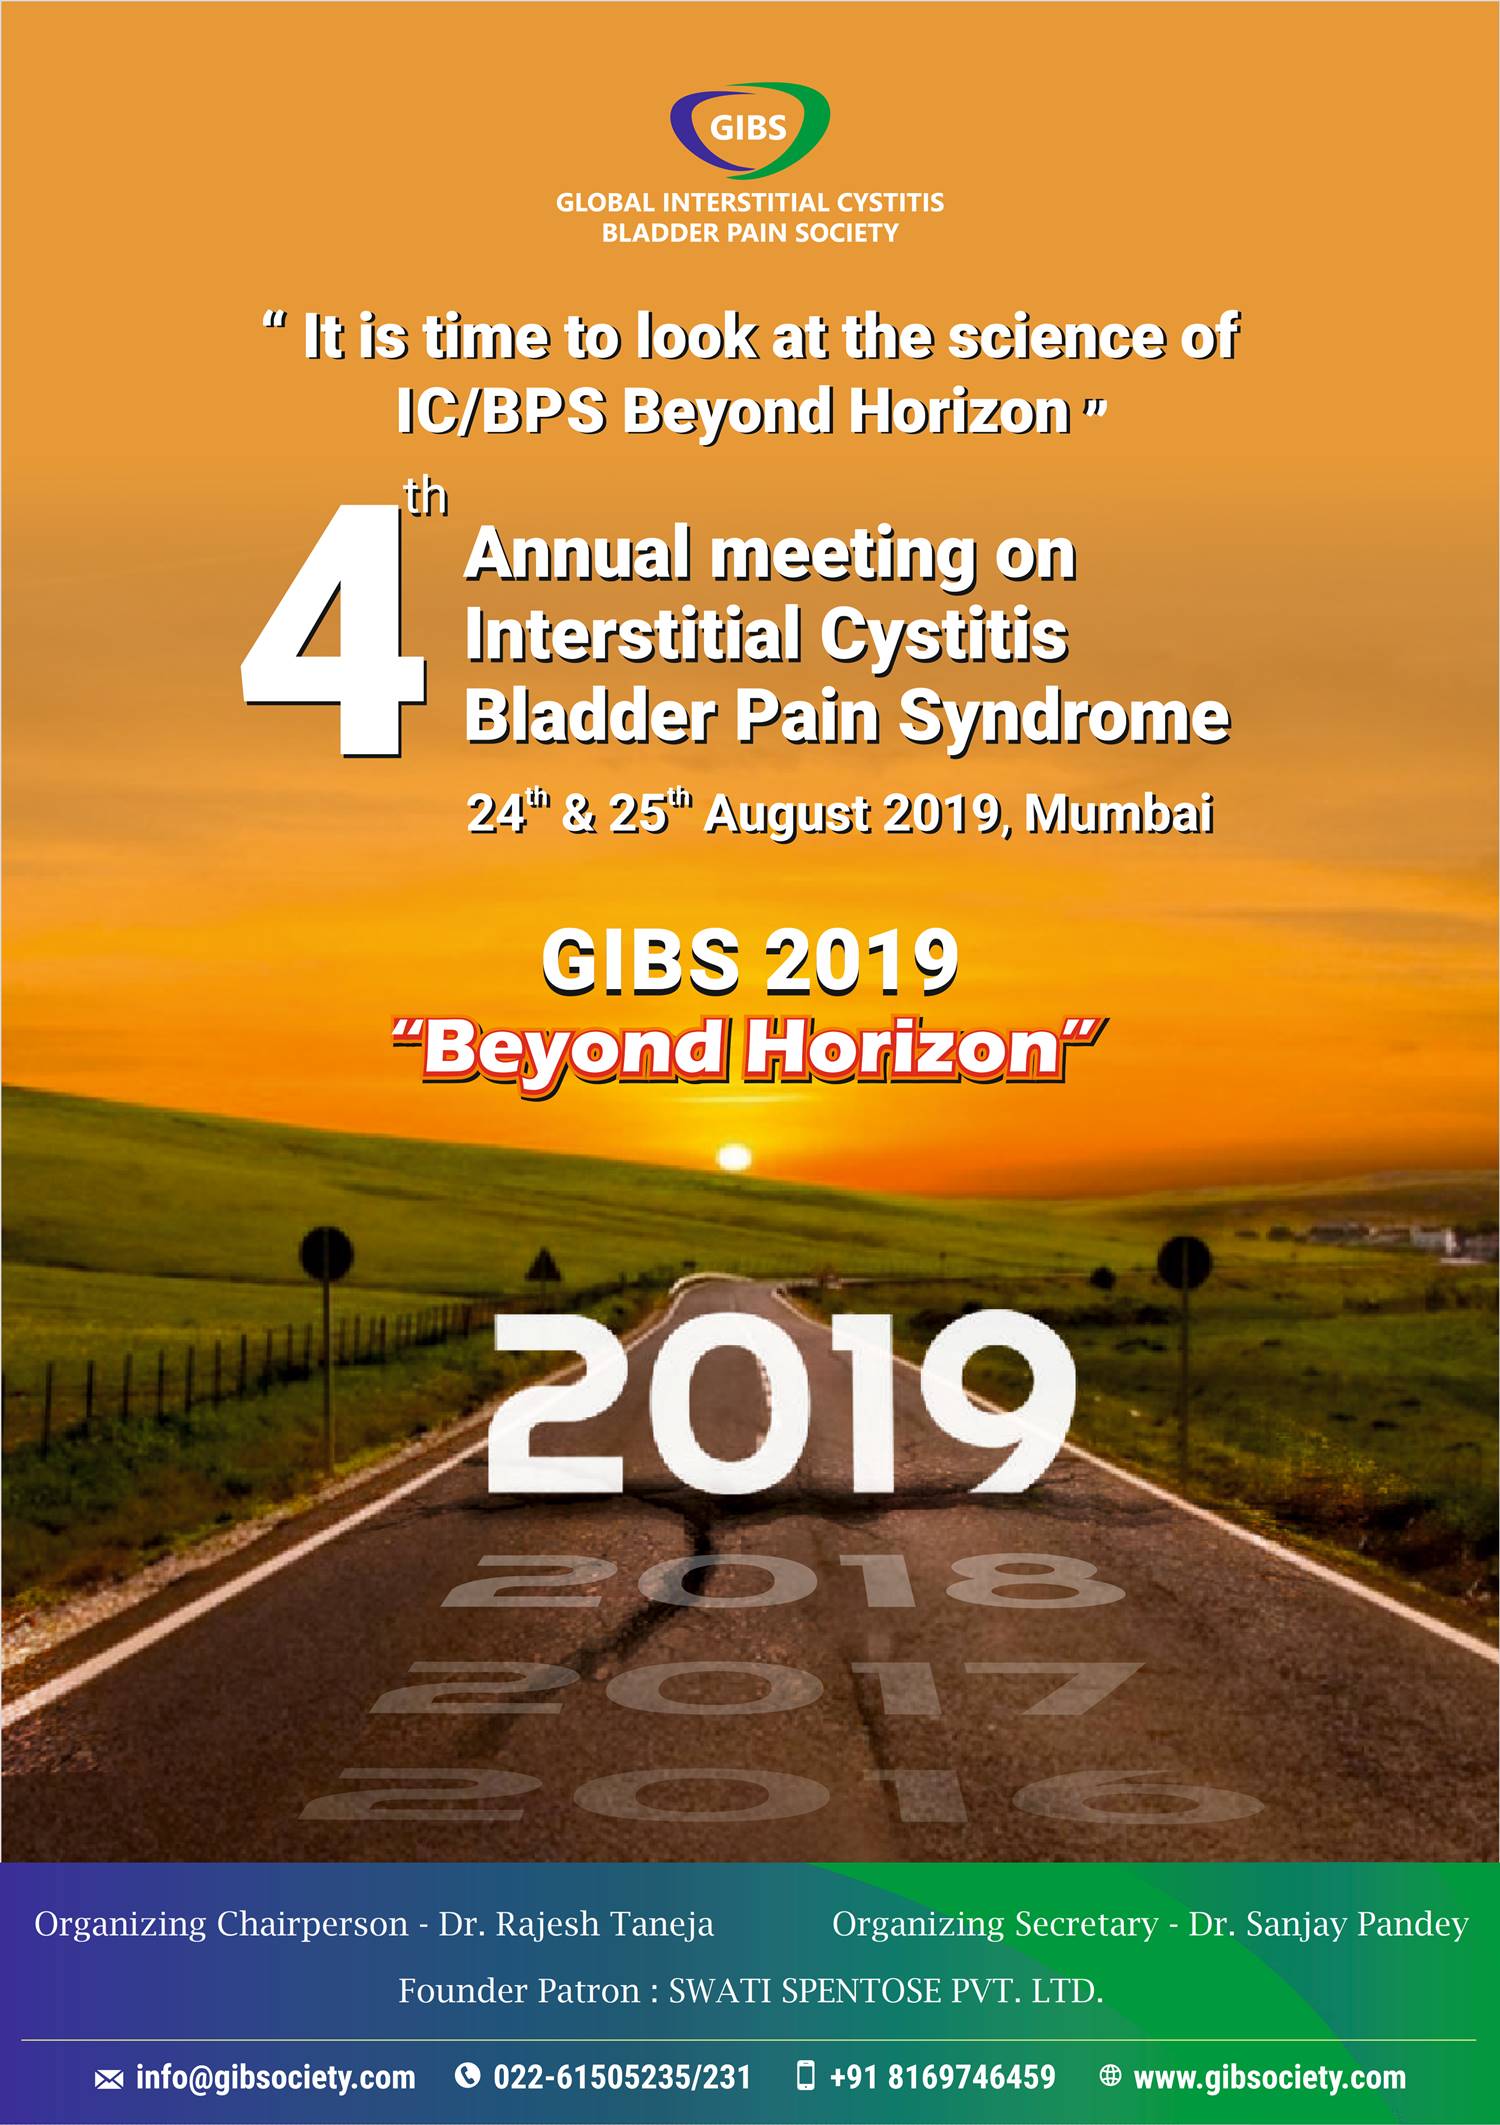 4th Annual Conference of the Global Interstitial Cystitis Bladder Pain Society (GIBS)